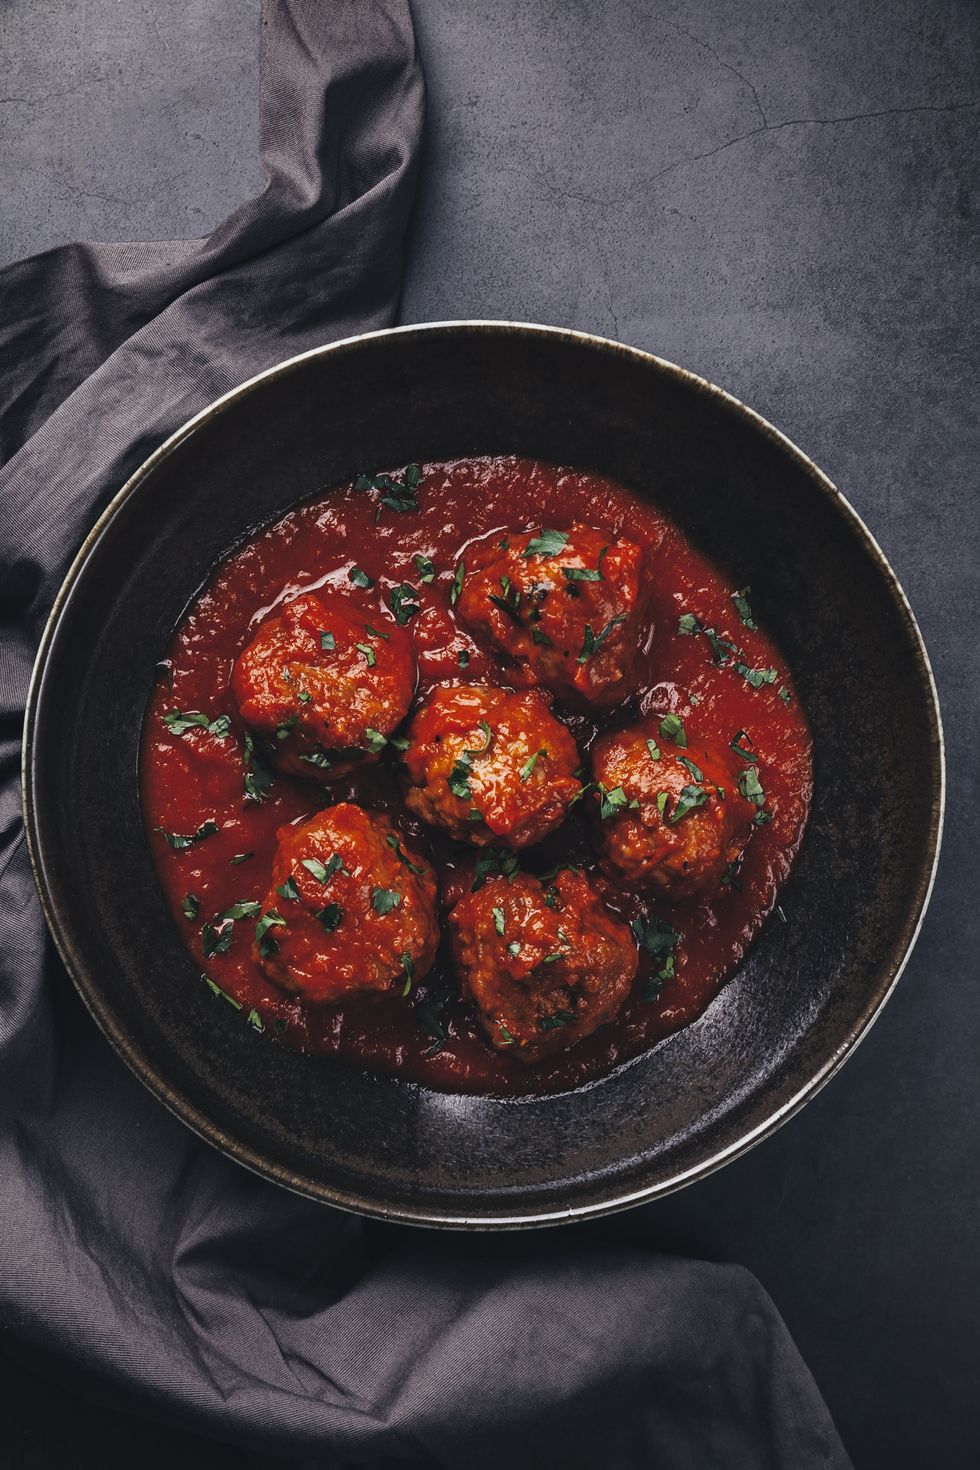 meatballs and tomato sauce on black background